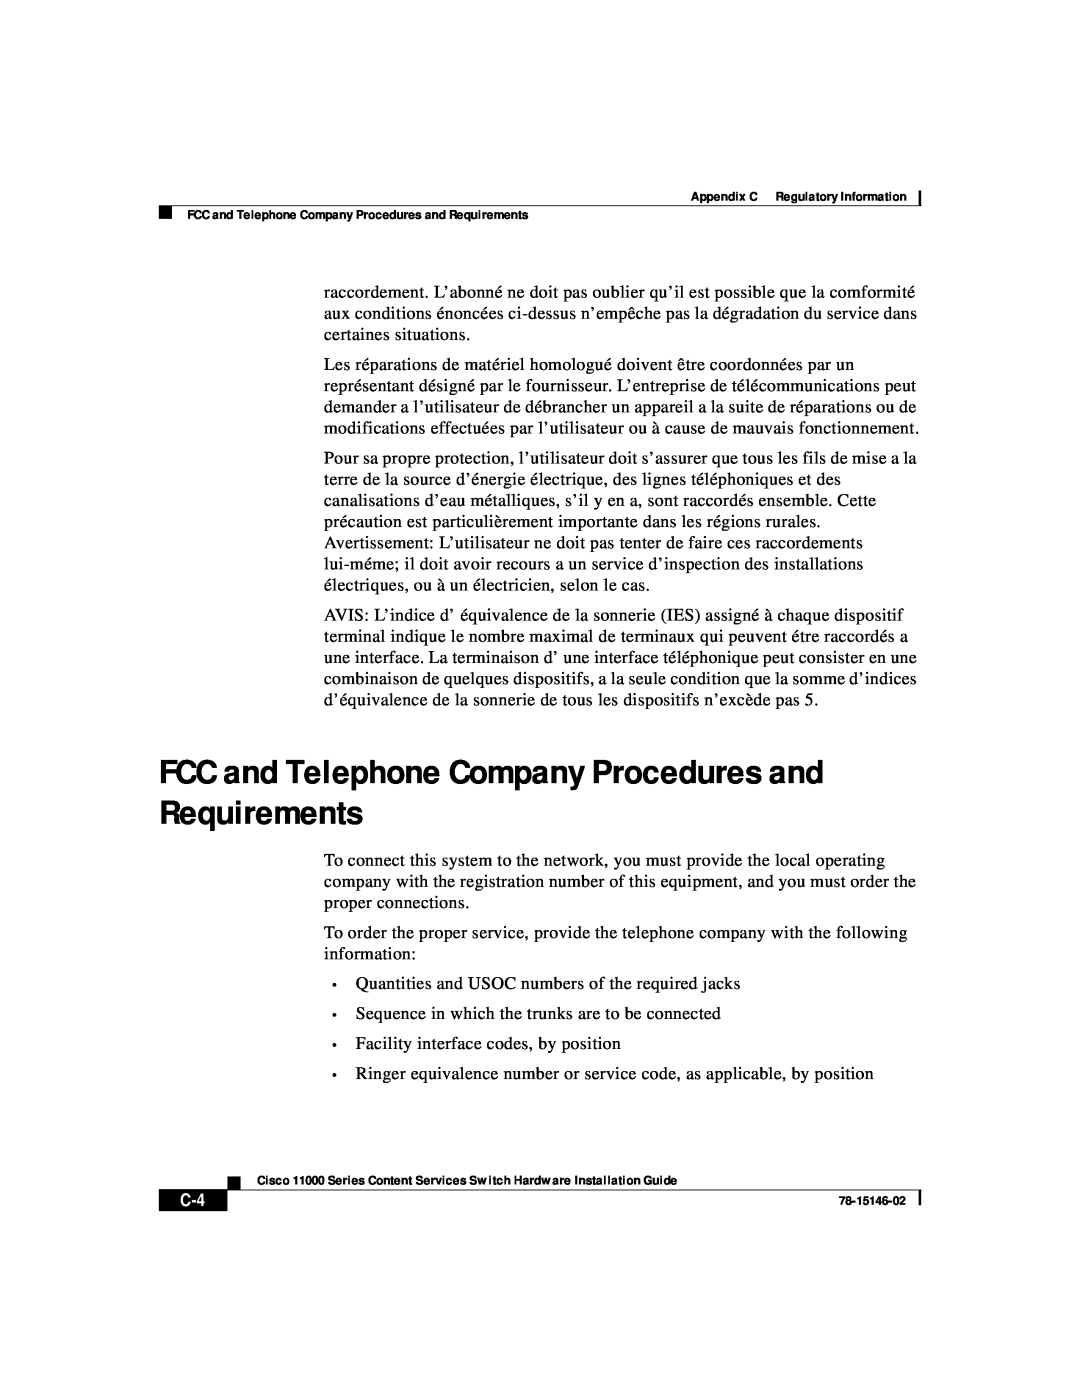 Cisco Systems 11000 Series manual FCC and Telephone Company Procedures and Requirements 